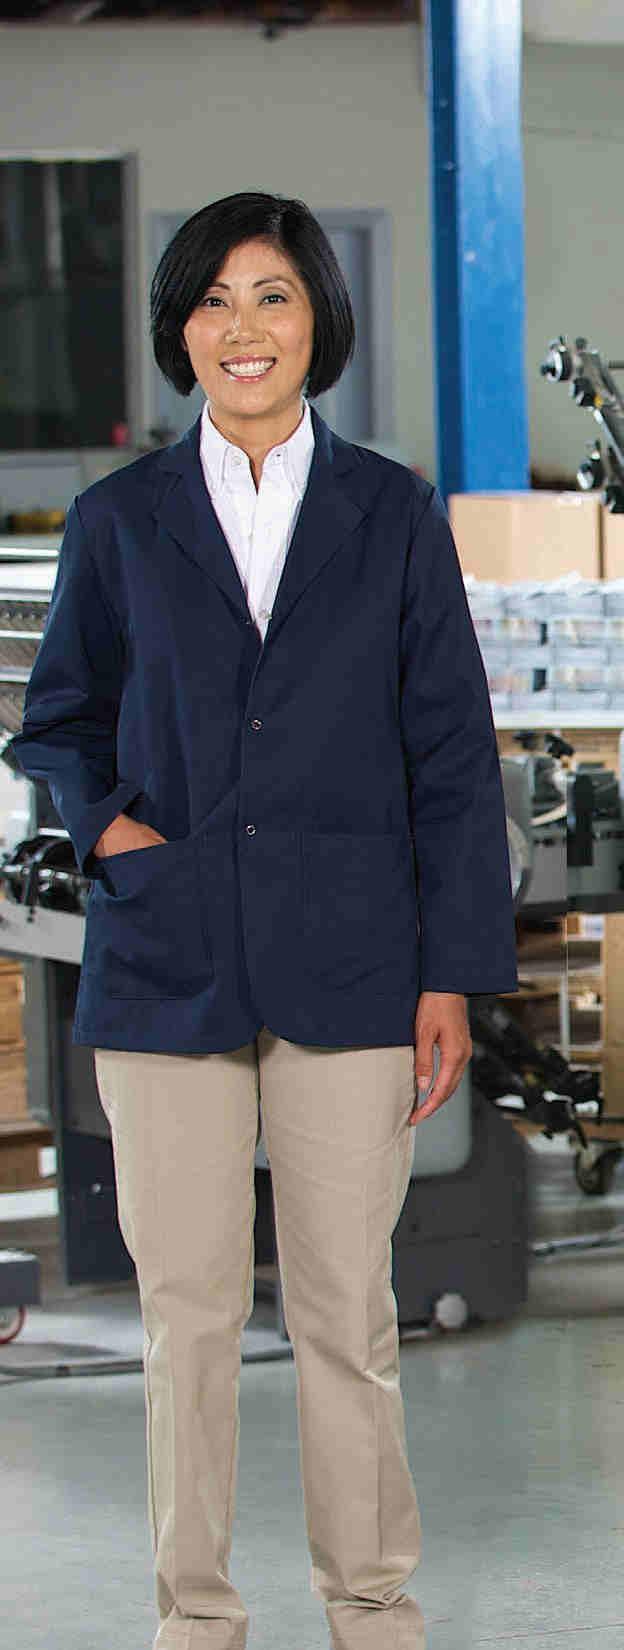 COUNTER COATS Always dependable, always durable...the substantial feel and comfortable fit with notched lapel collar make this style a proven choice for commercial and industrial wear.